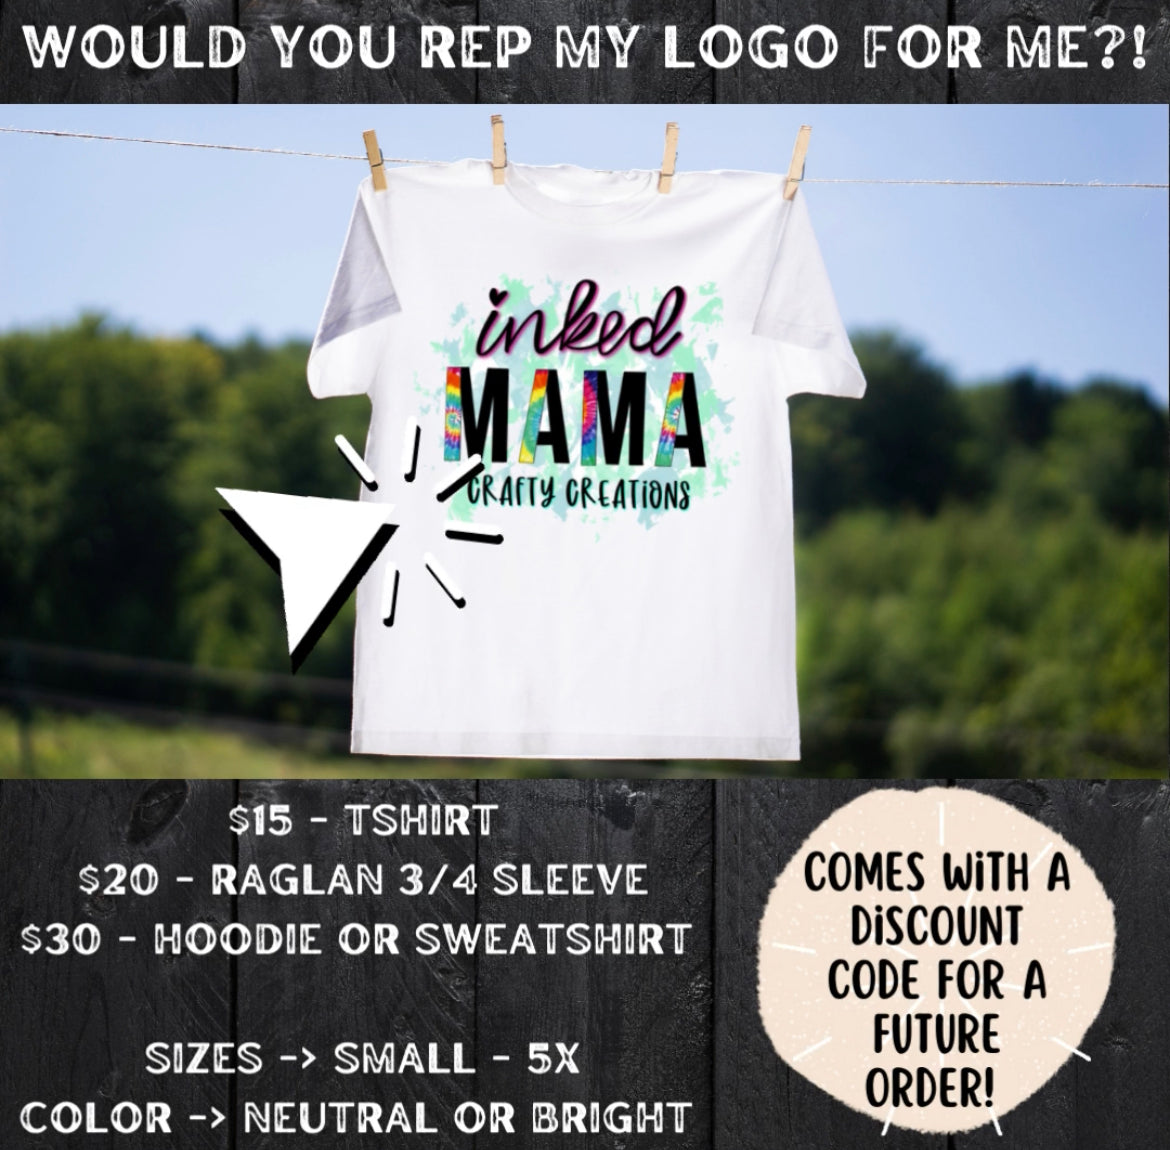 Inked Mama Crafty Creations Logo Shirt! Support and rep for my small business!